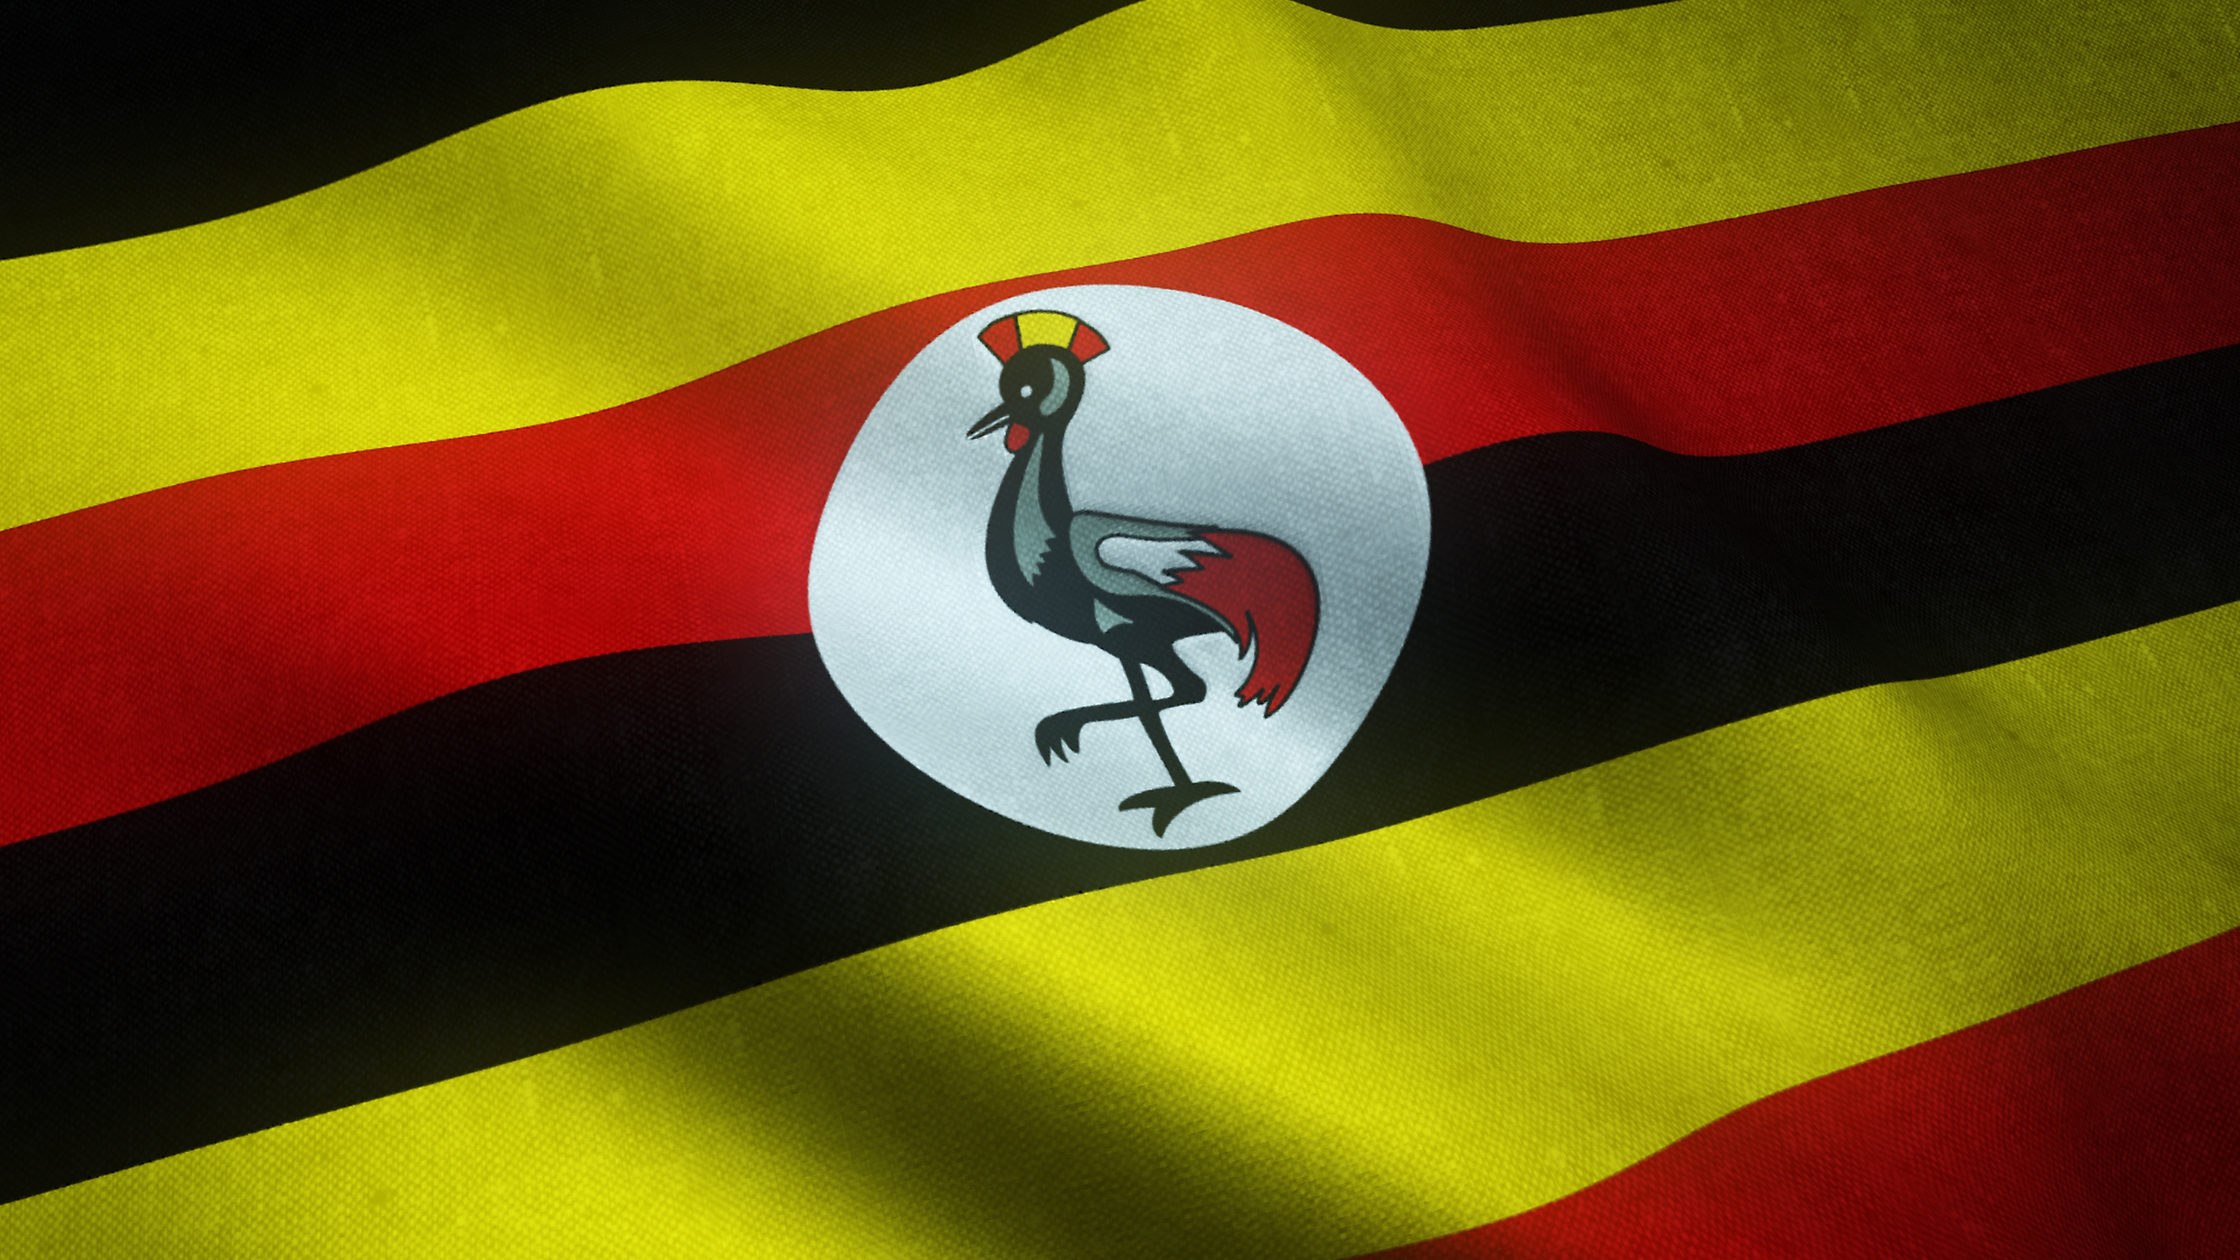 Tax waiver in Uganda as a phenomenon is becoming popular since the outbreak of the Covid-19 pandemic as a tool to ease the effect posed on the nation’s economy.